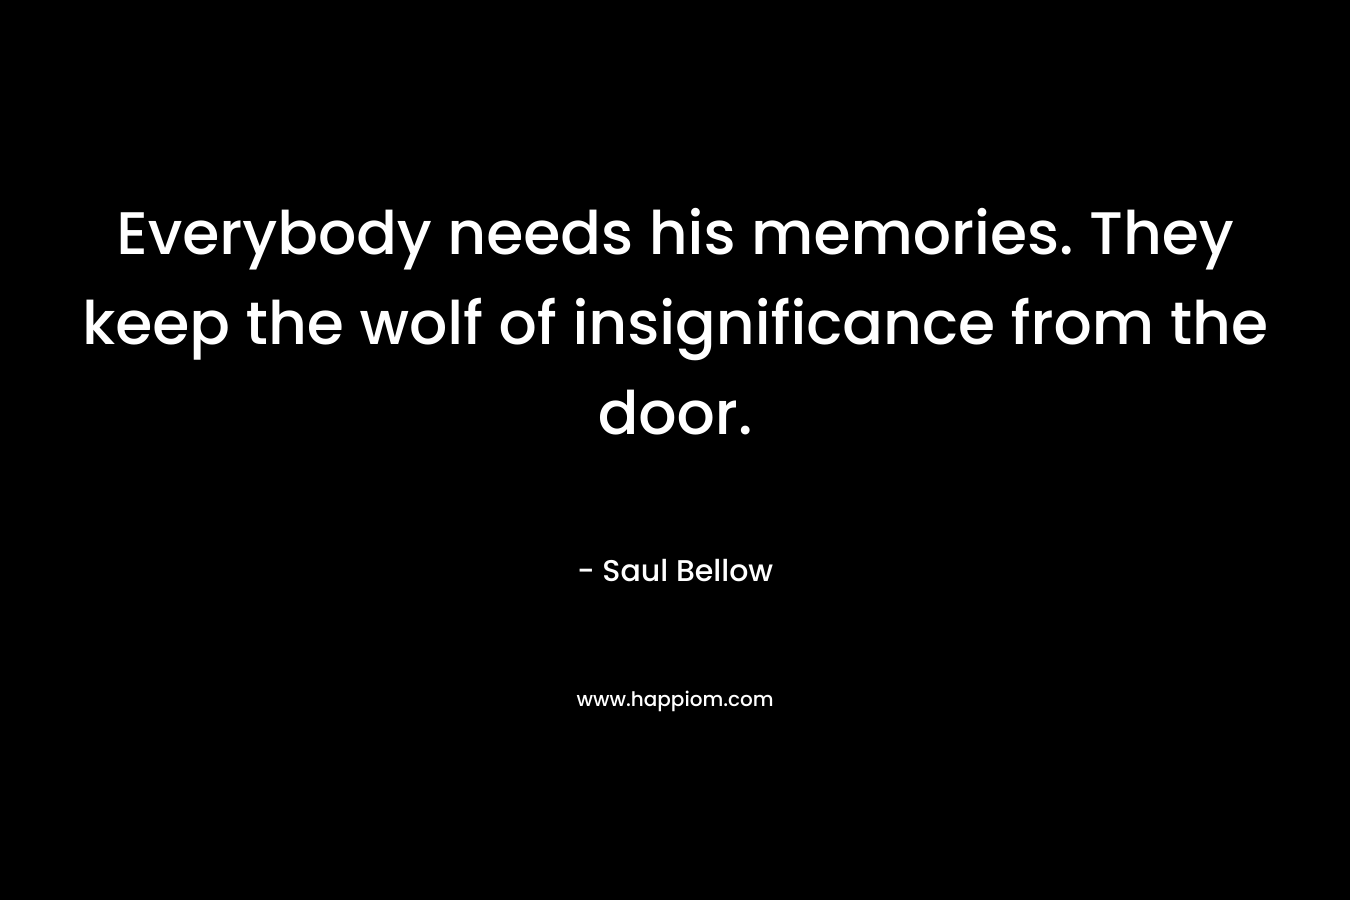 Everybody needs his memories. They keep the wolf of insignificance from the door. – Saul Bellow